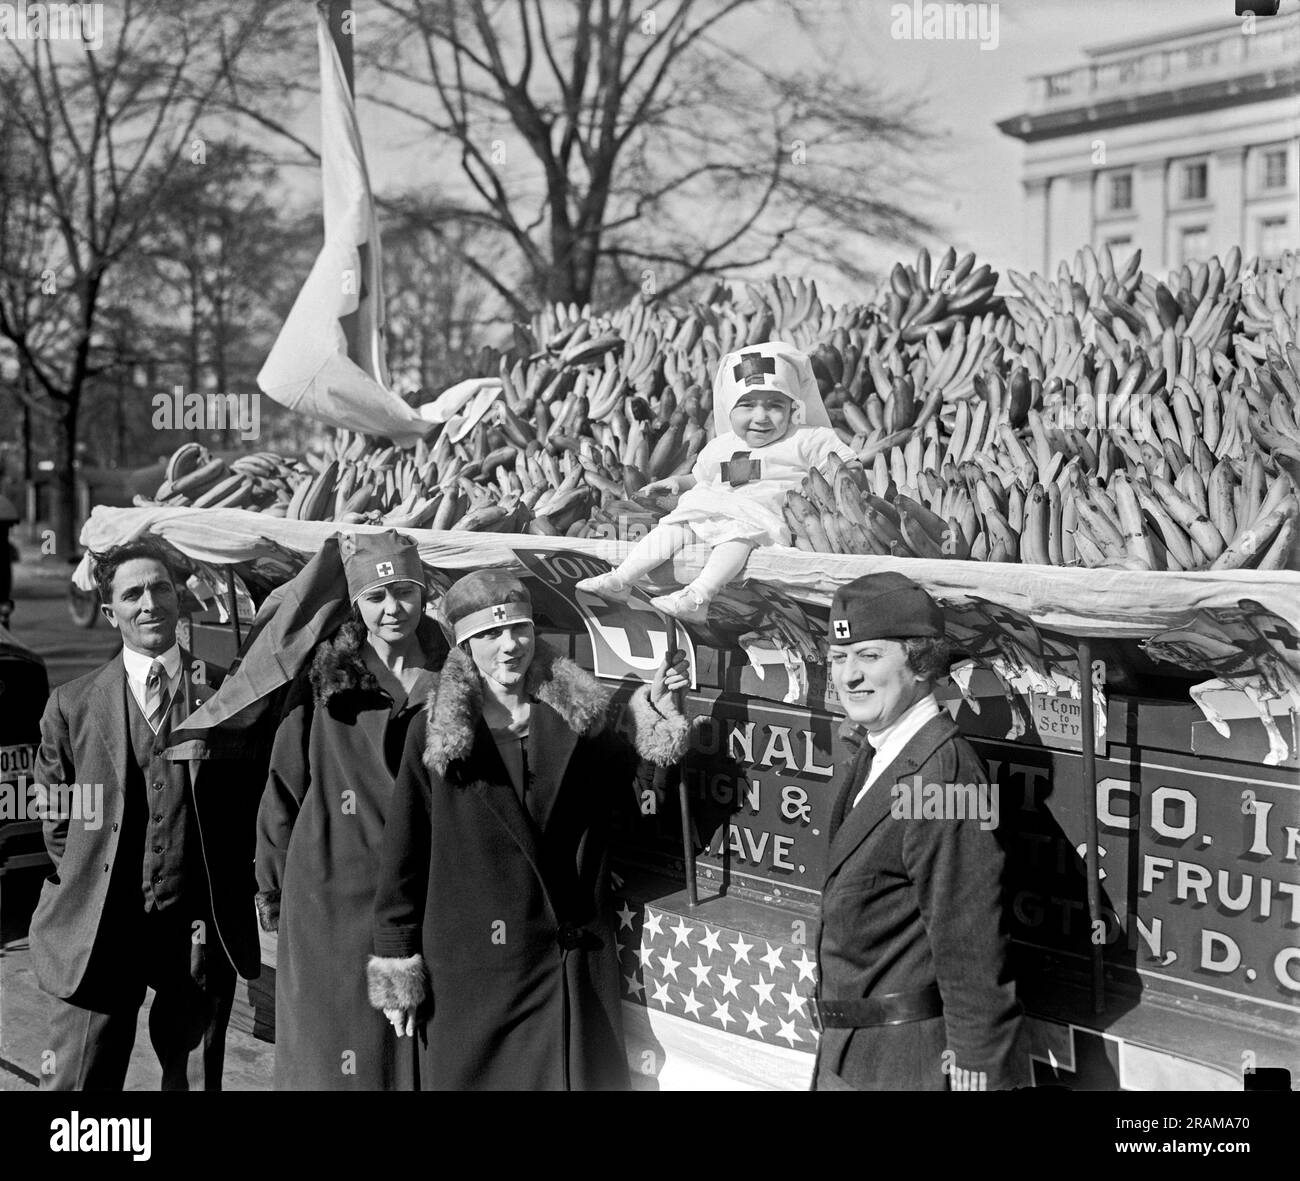 Washington D.C.:  November 14, 1925. An auction of bananas for the benefit of the Red Cross. Stock Photo